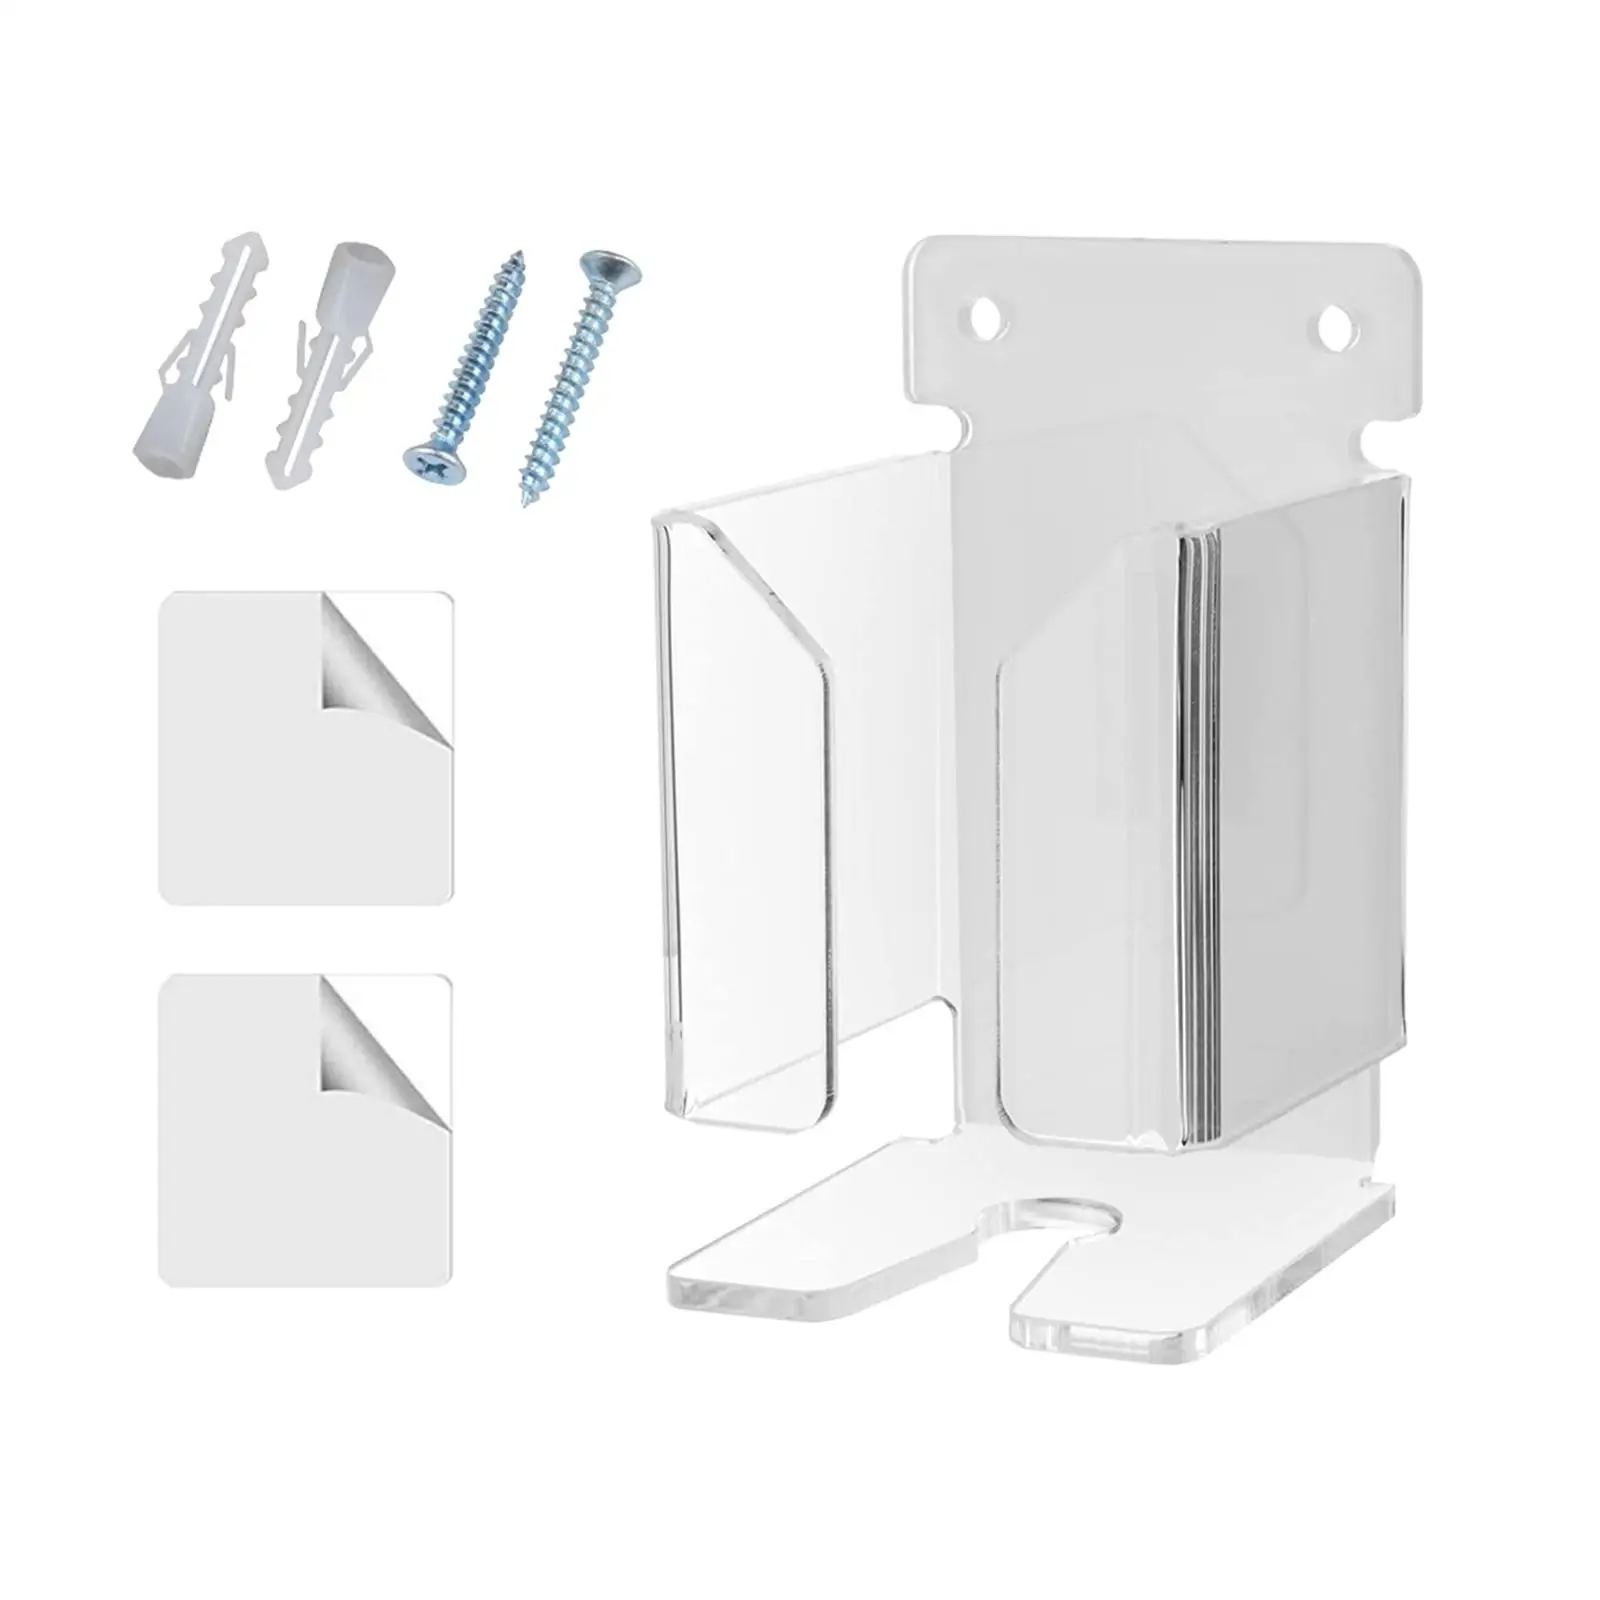 Wall Mount Electric Shaver Holder Utility Toothpaste Shaver Storage Two Installation Shaver Hanger for Electric Shaver Bathroom